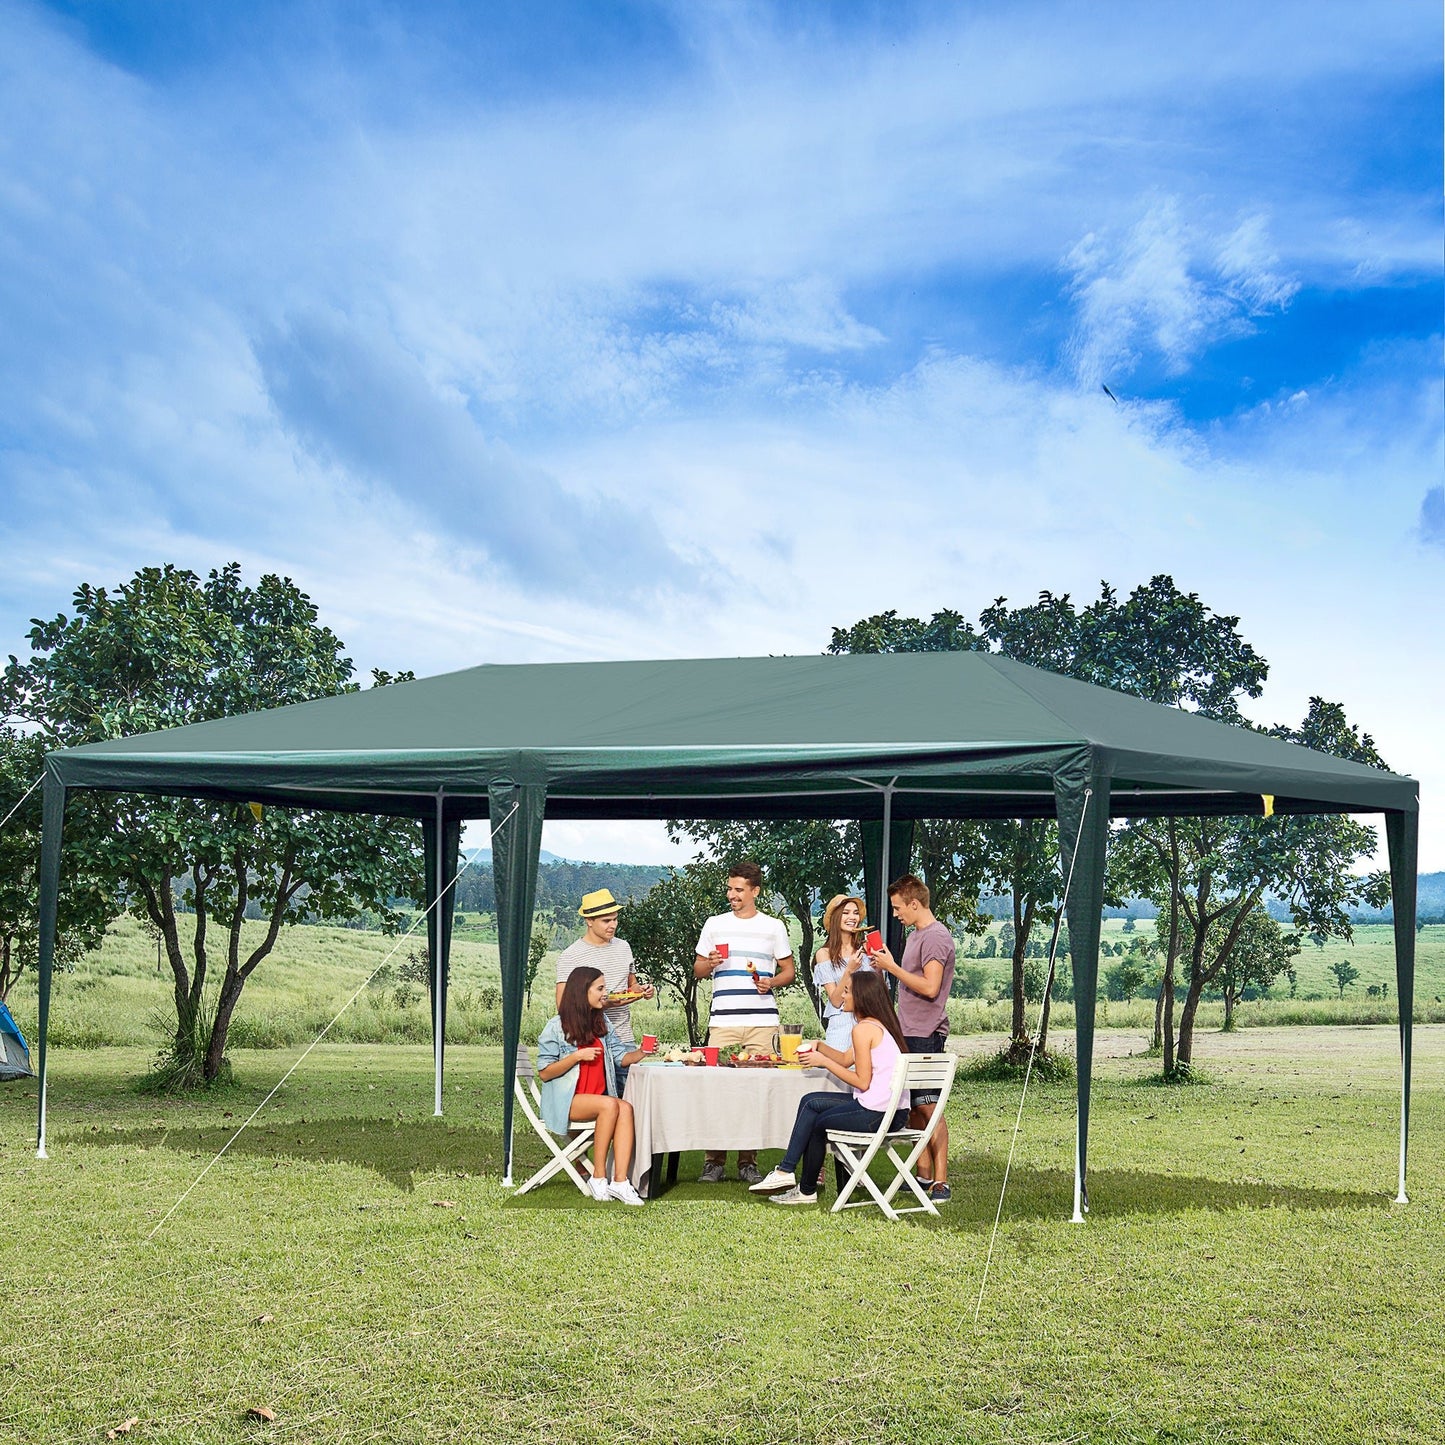 19'x9' Party Tent Gazebo Canopy Garden Sun Shade for Outdoor Event with Removable Mosquito Mesh Netting, Green at Gallery Canada